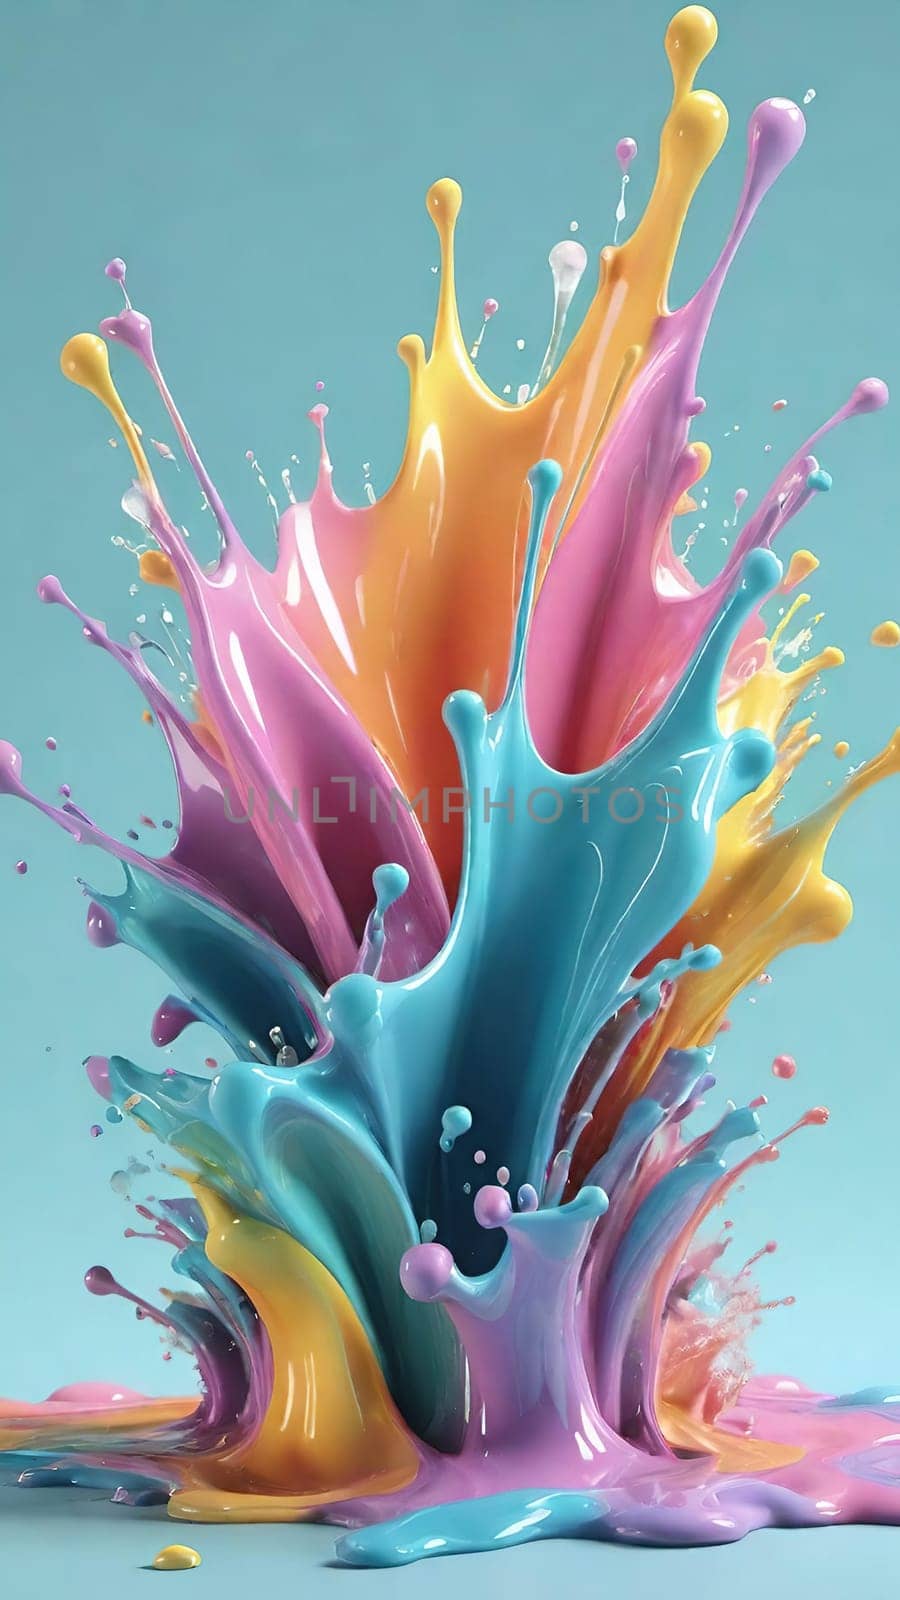 Colorful paint splashes isolated on blue background. 3d rendering.